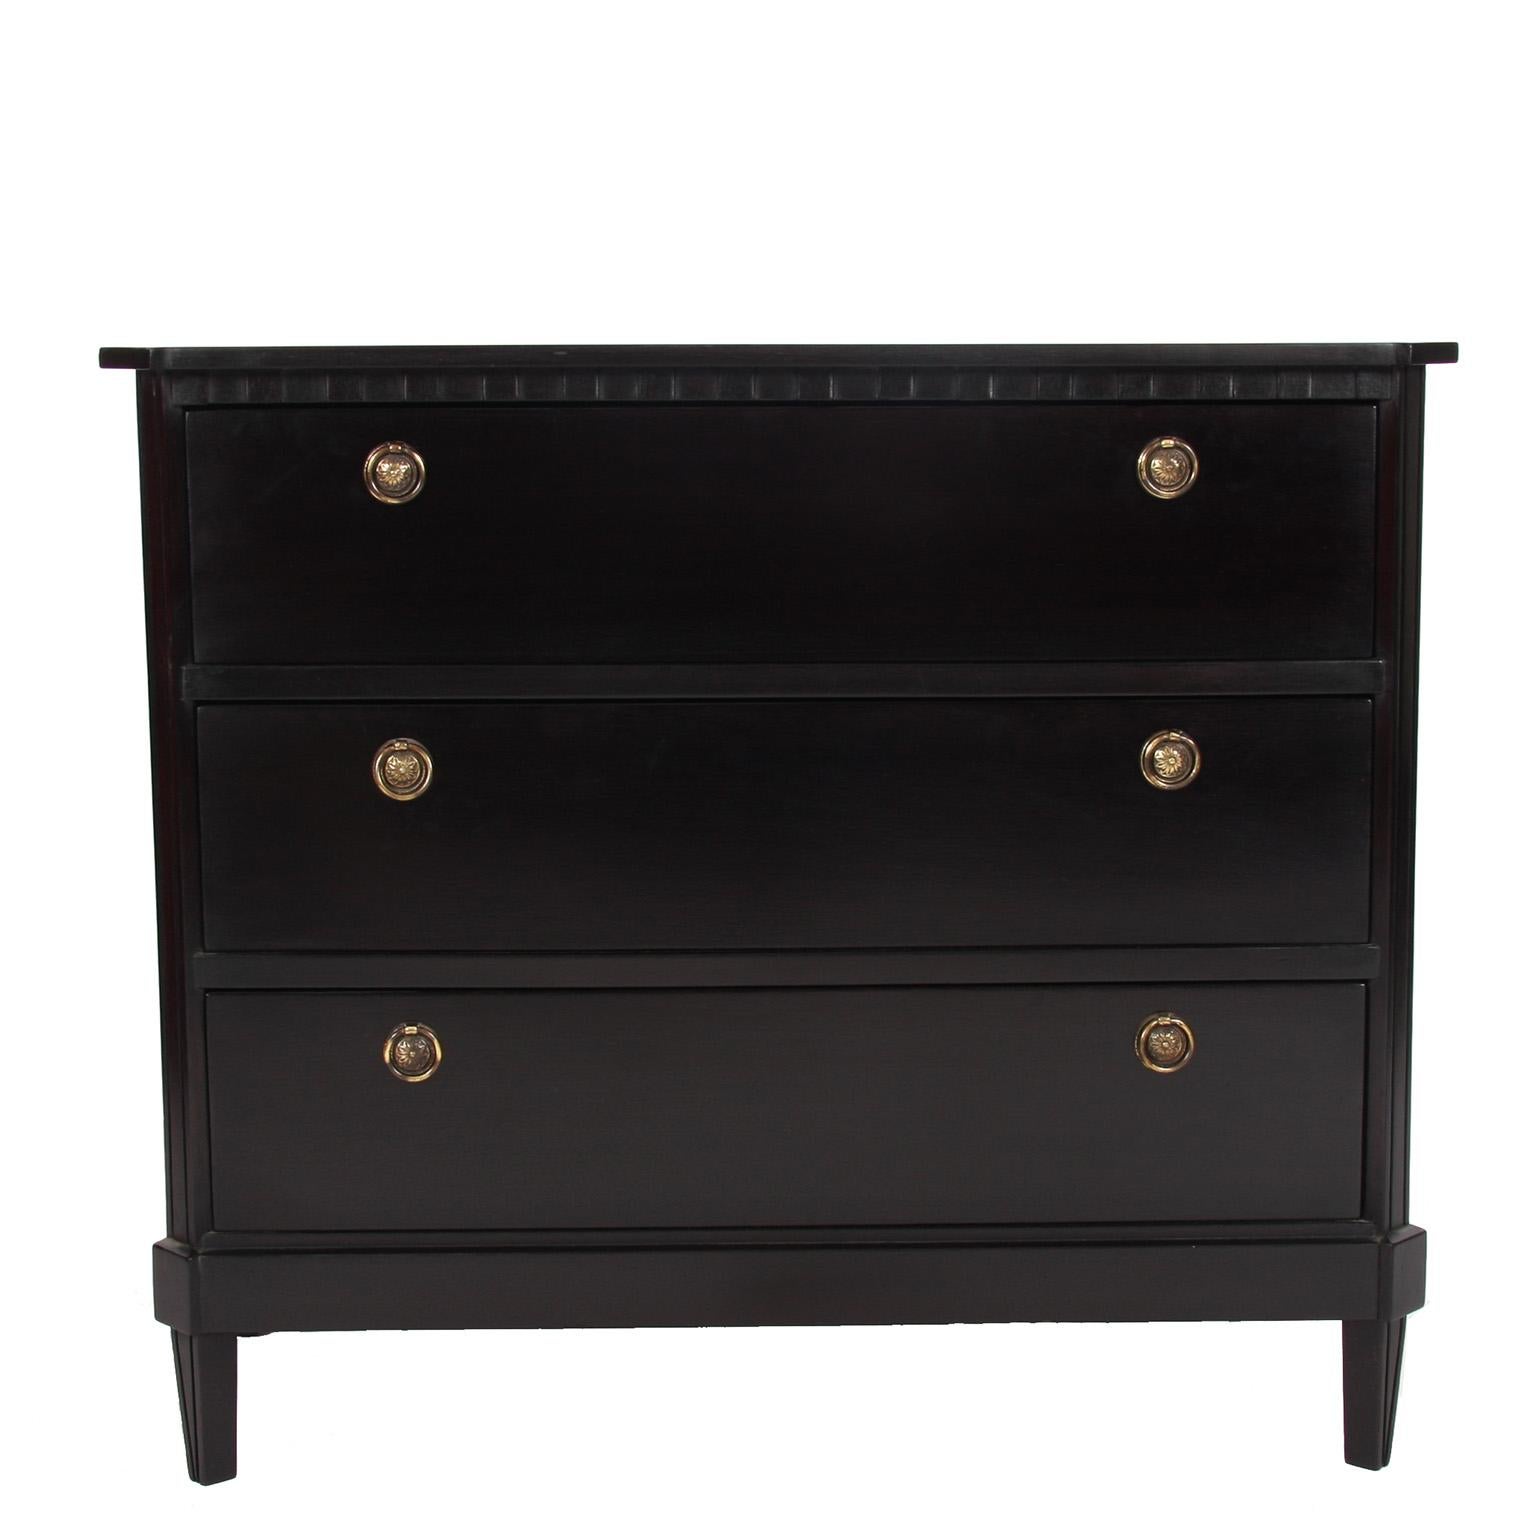 Swedish mid-20th century

An elegant, ebonised, black chest of drawers with brass handles. With three drawers. 

Lovely proportions. Dentil molding detail.
 